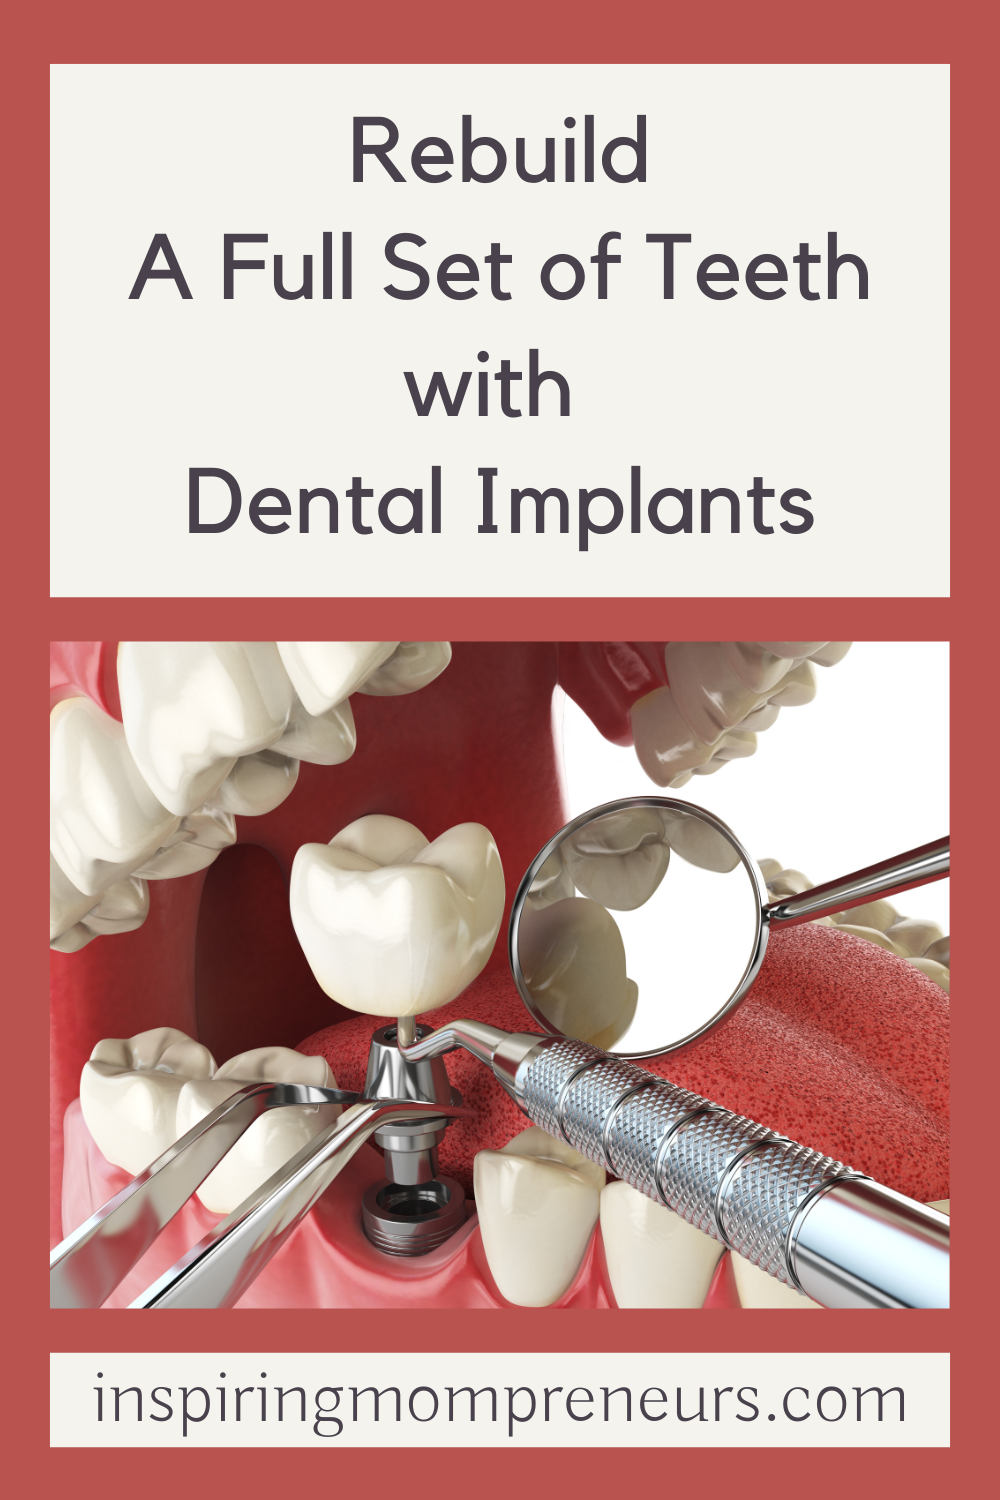 When you have had an accident or taken a blow to the mouth, the best option is likely to be to rebuild a full set of teeth with dental implants. Read more...